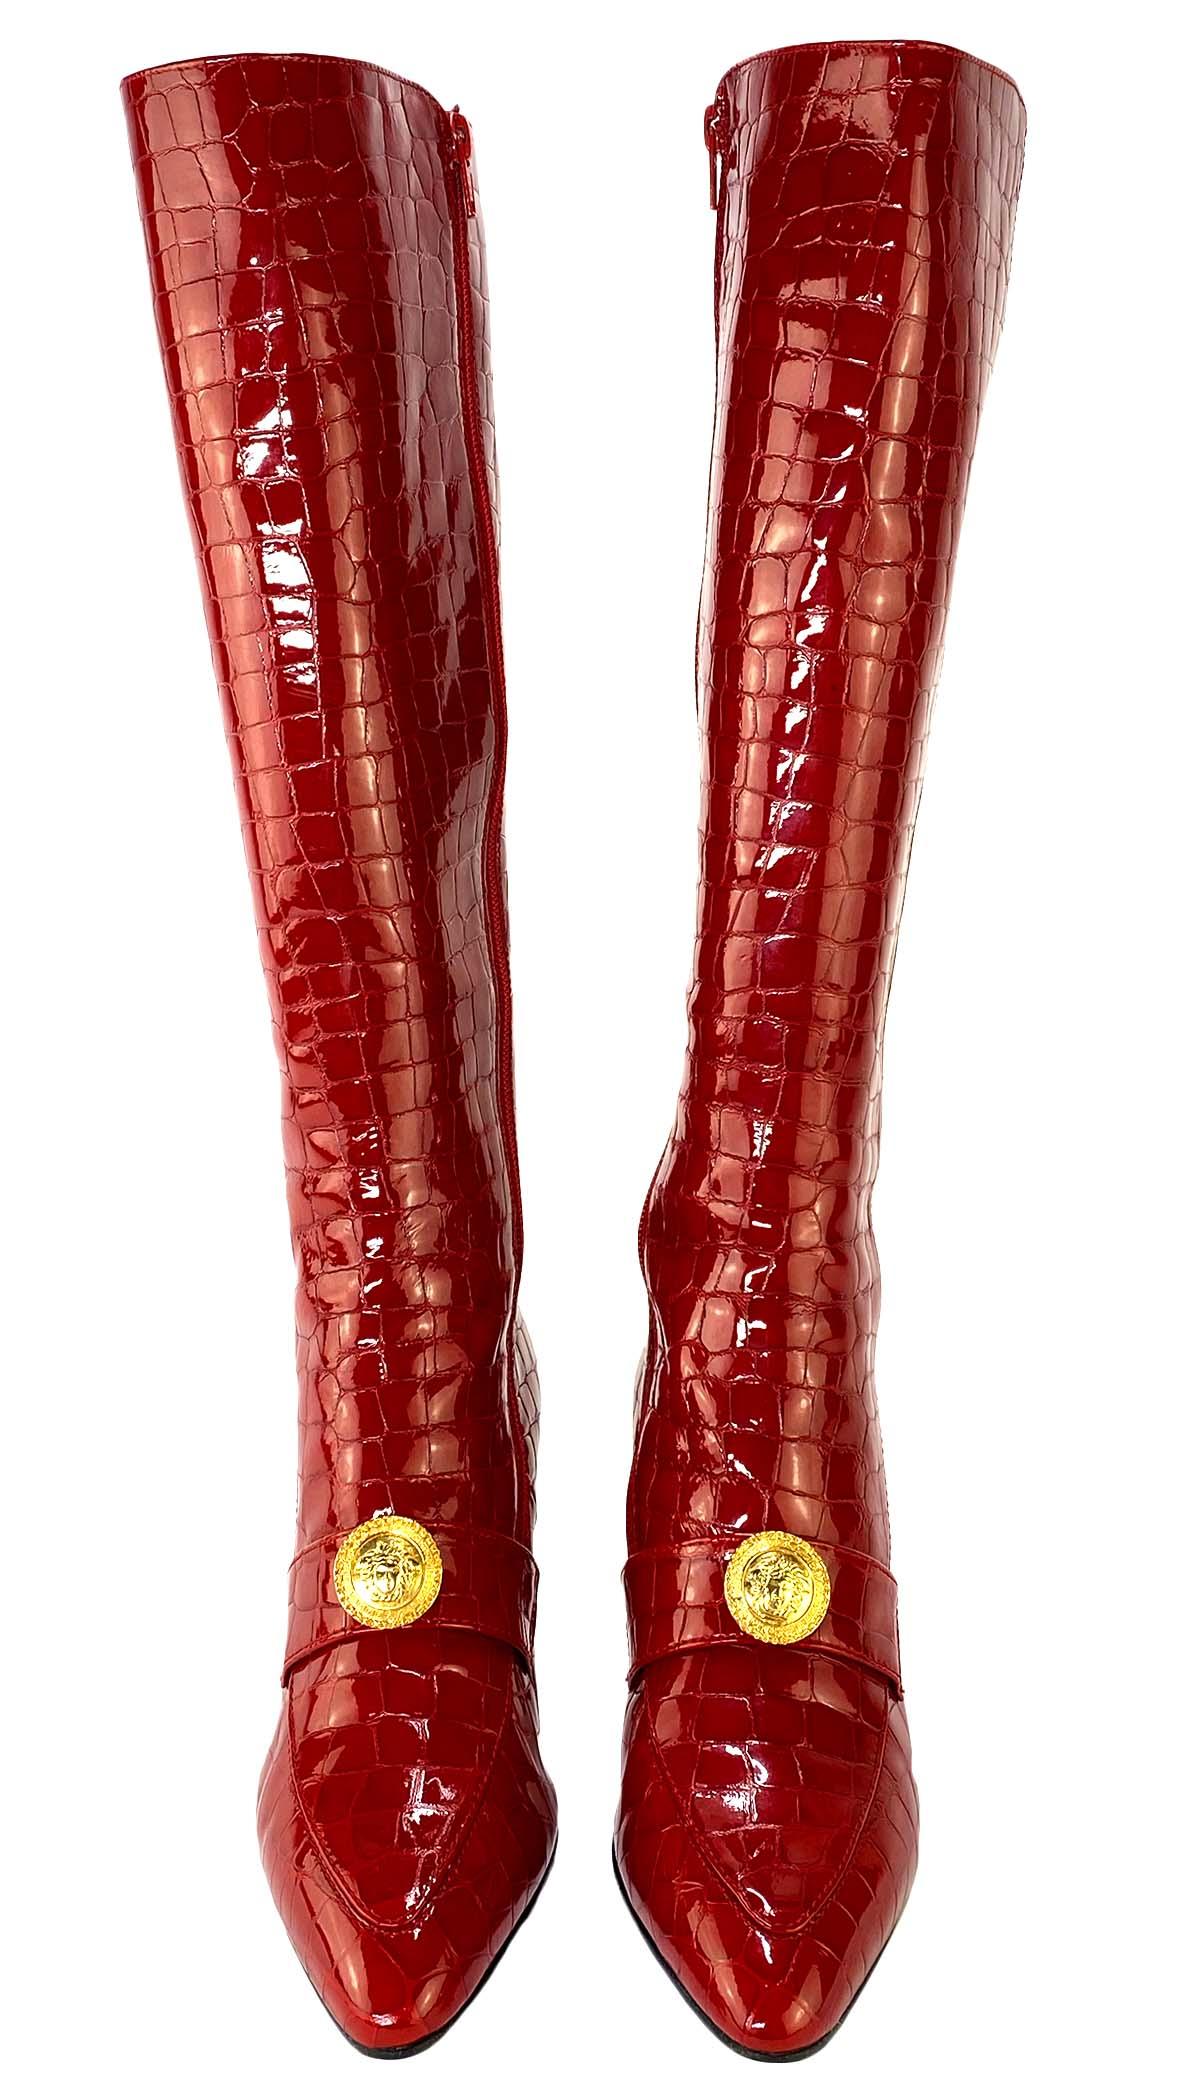 TheRealList presents: a pair of red hot crocodile embossed Gianni Versace boots, designed by Gianni Versace. These stunning heels boots are from the 1990s and feature a golden Medusa emblem on the top of the shoe. The patent leather is embossed with